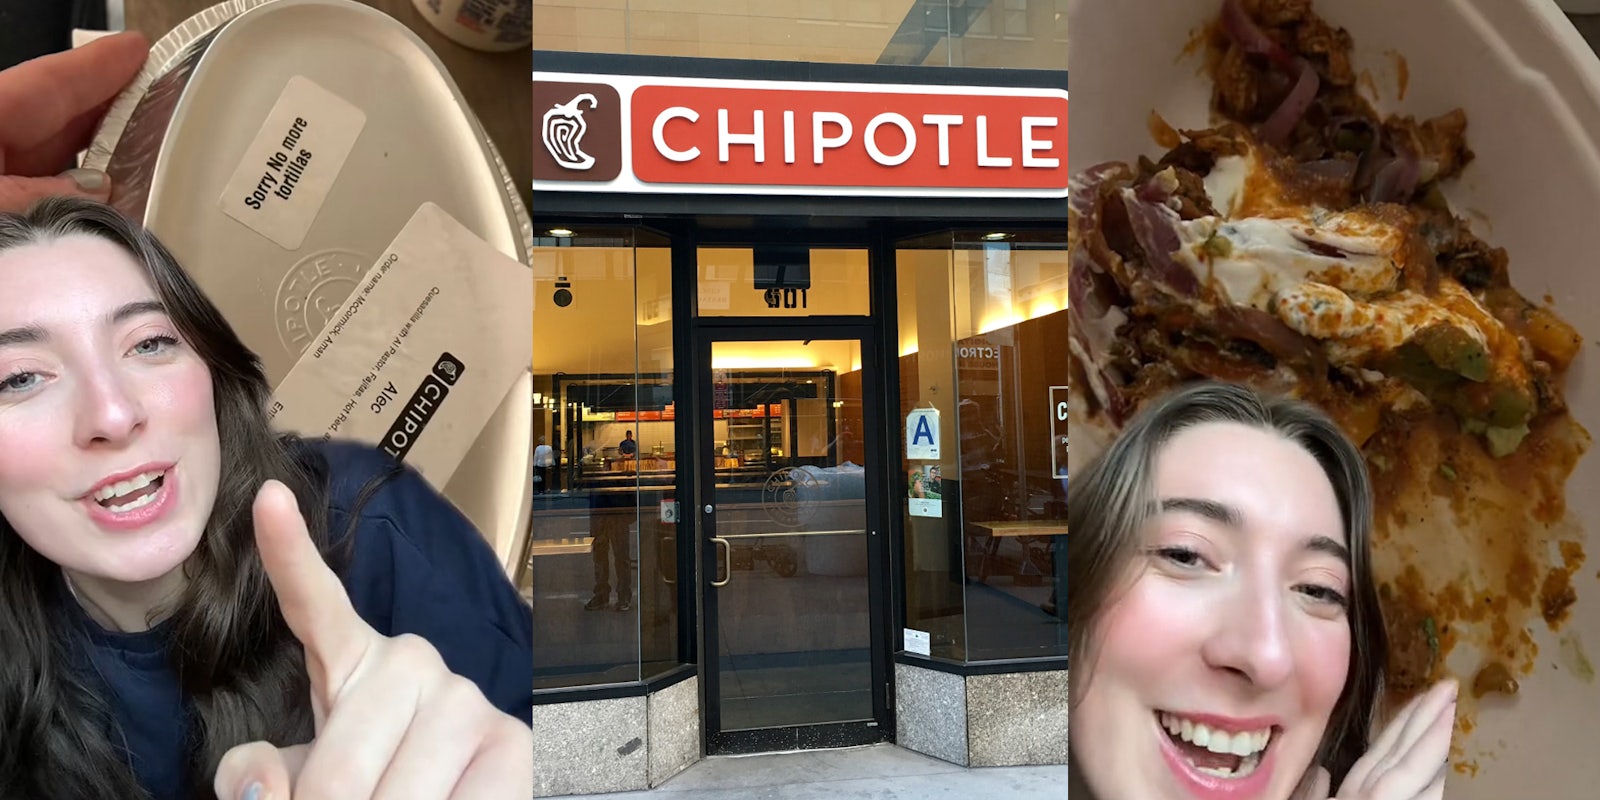 Chipotle customer greenscreen TikTok over image of Chipotle food in container with sticker 'sorry no more tortillas' (l) Chipotle sign on building with sidewalk (c) Chipotle customer greenscreen TikTok over image of Chipotle food (r)